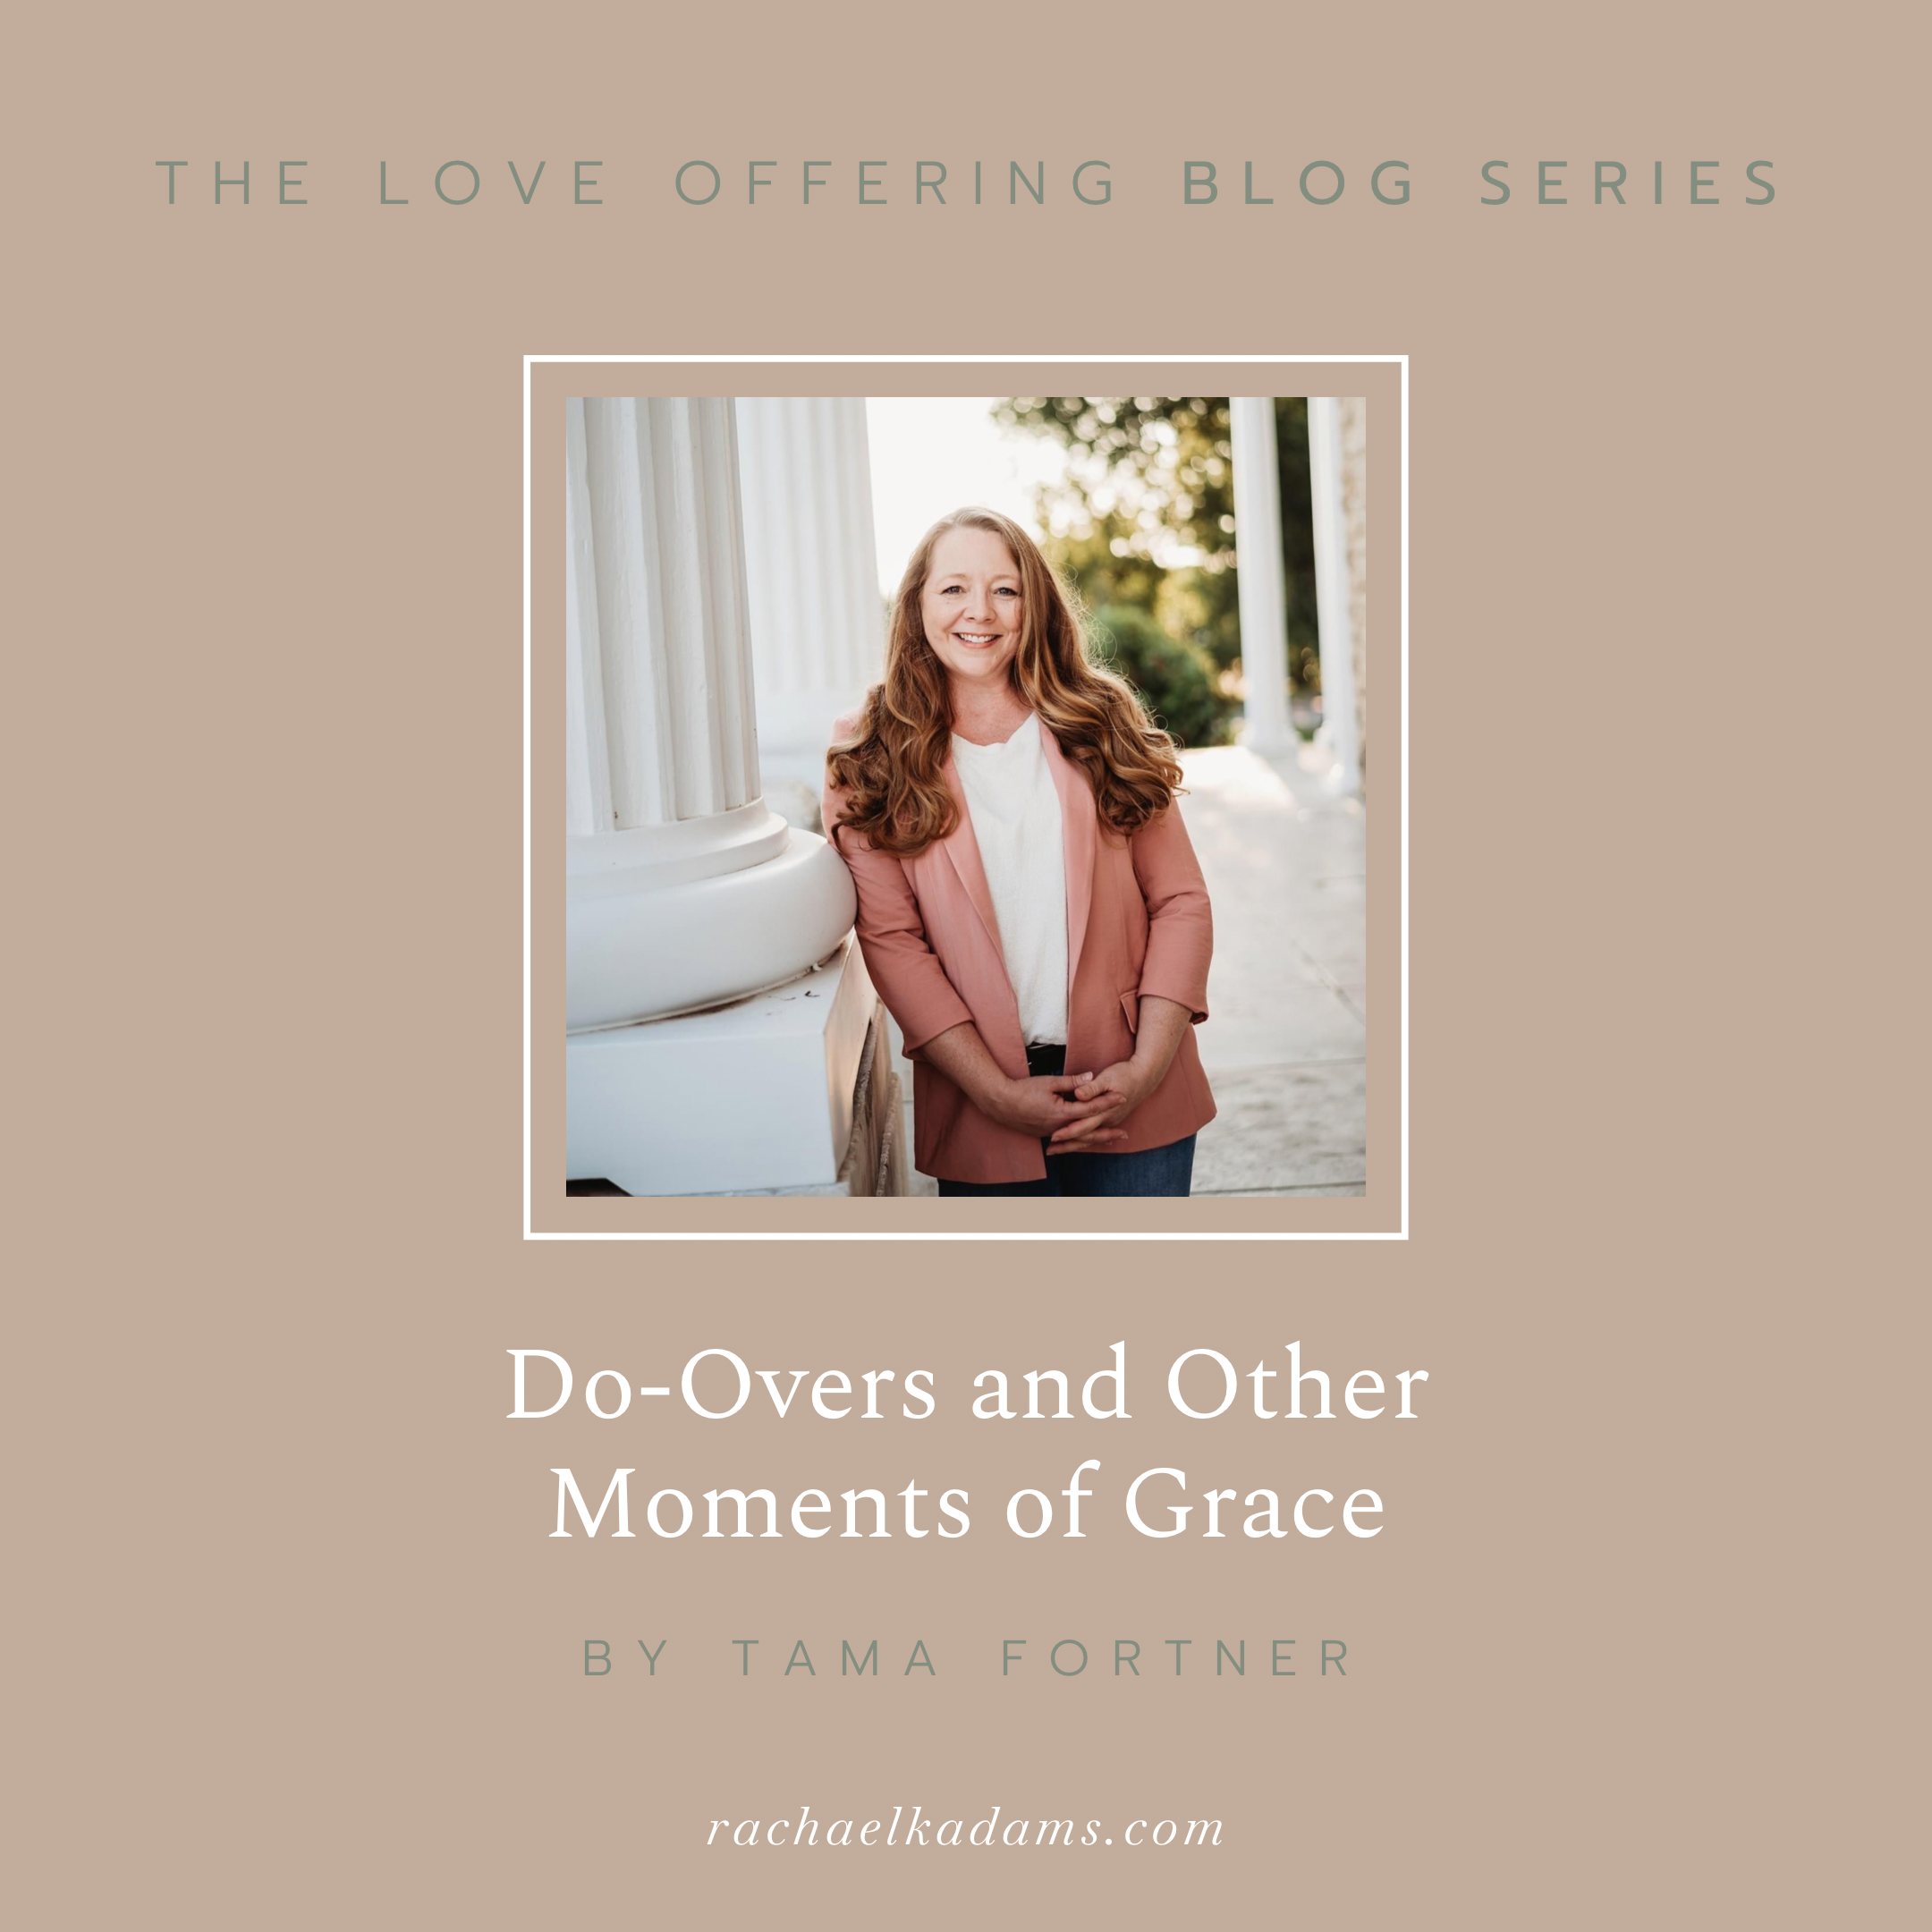 Do-Overs and Other Moments of Grace by Tama Fortner 